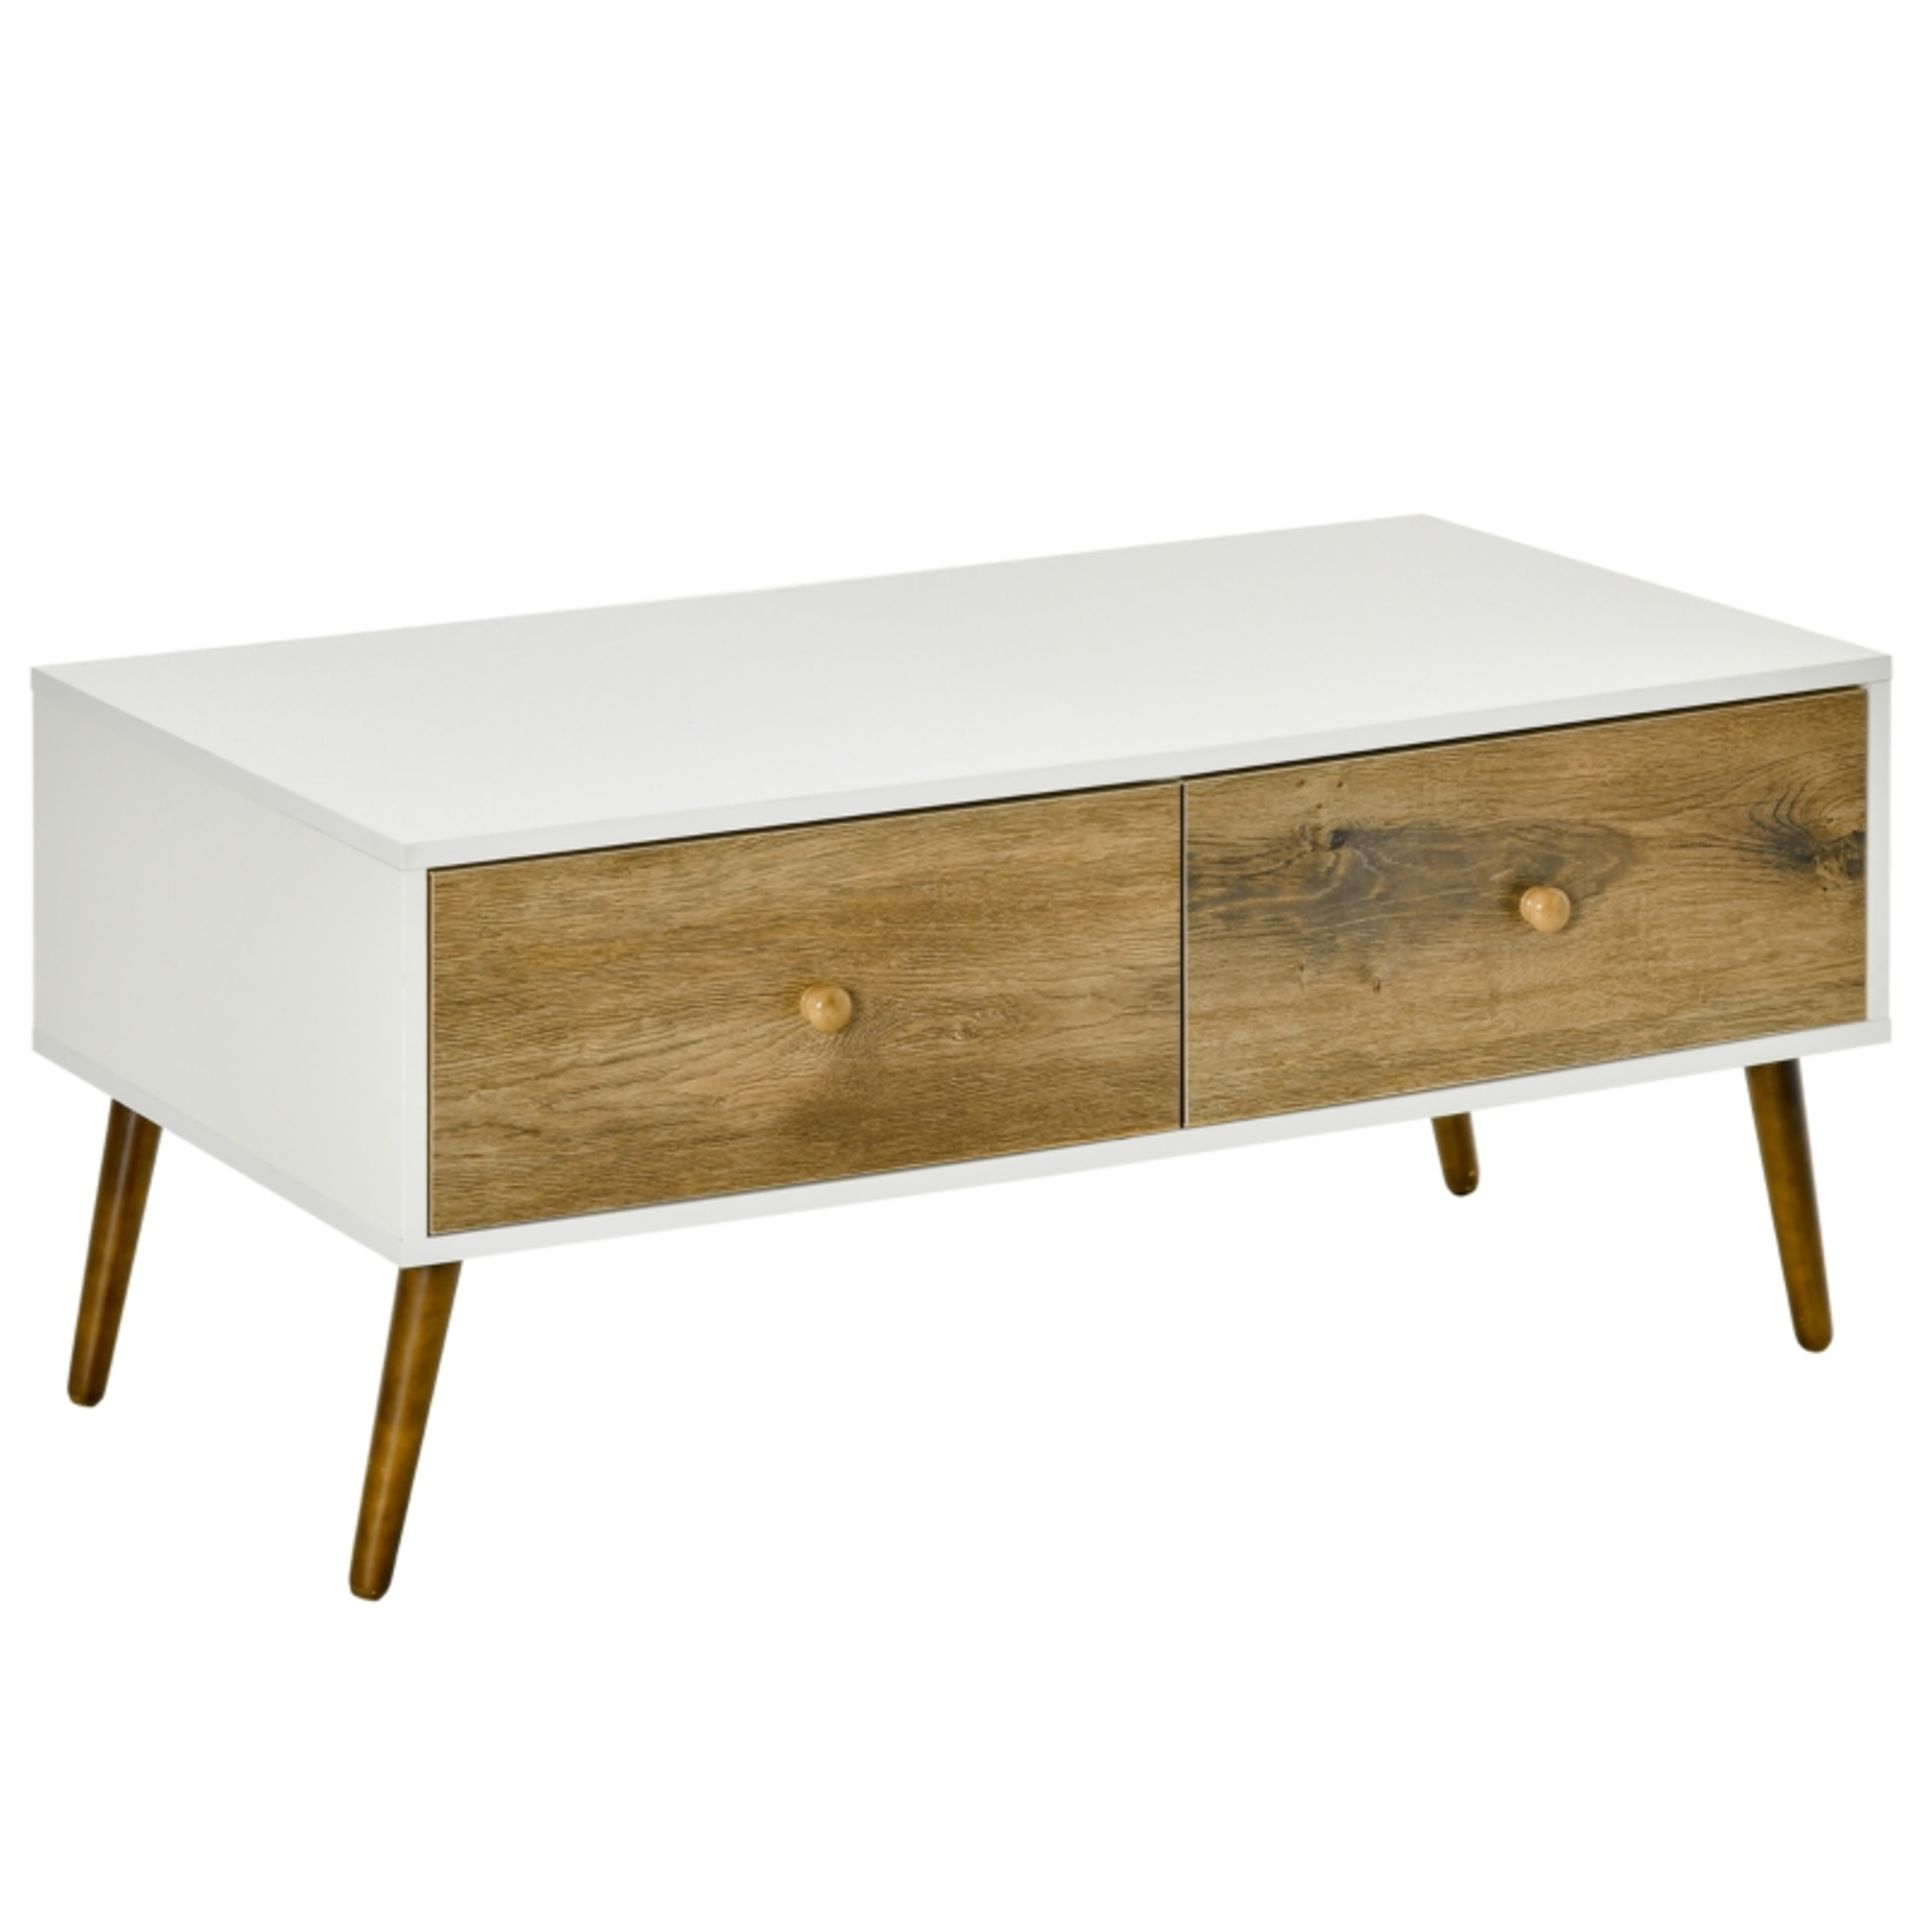 RRP £56.99 - Two-Drawer Scandinavian-Style Coffee Table, with Wood Legs - White